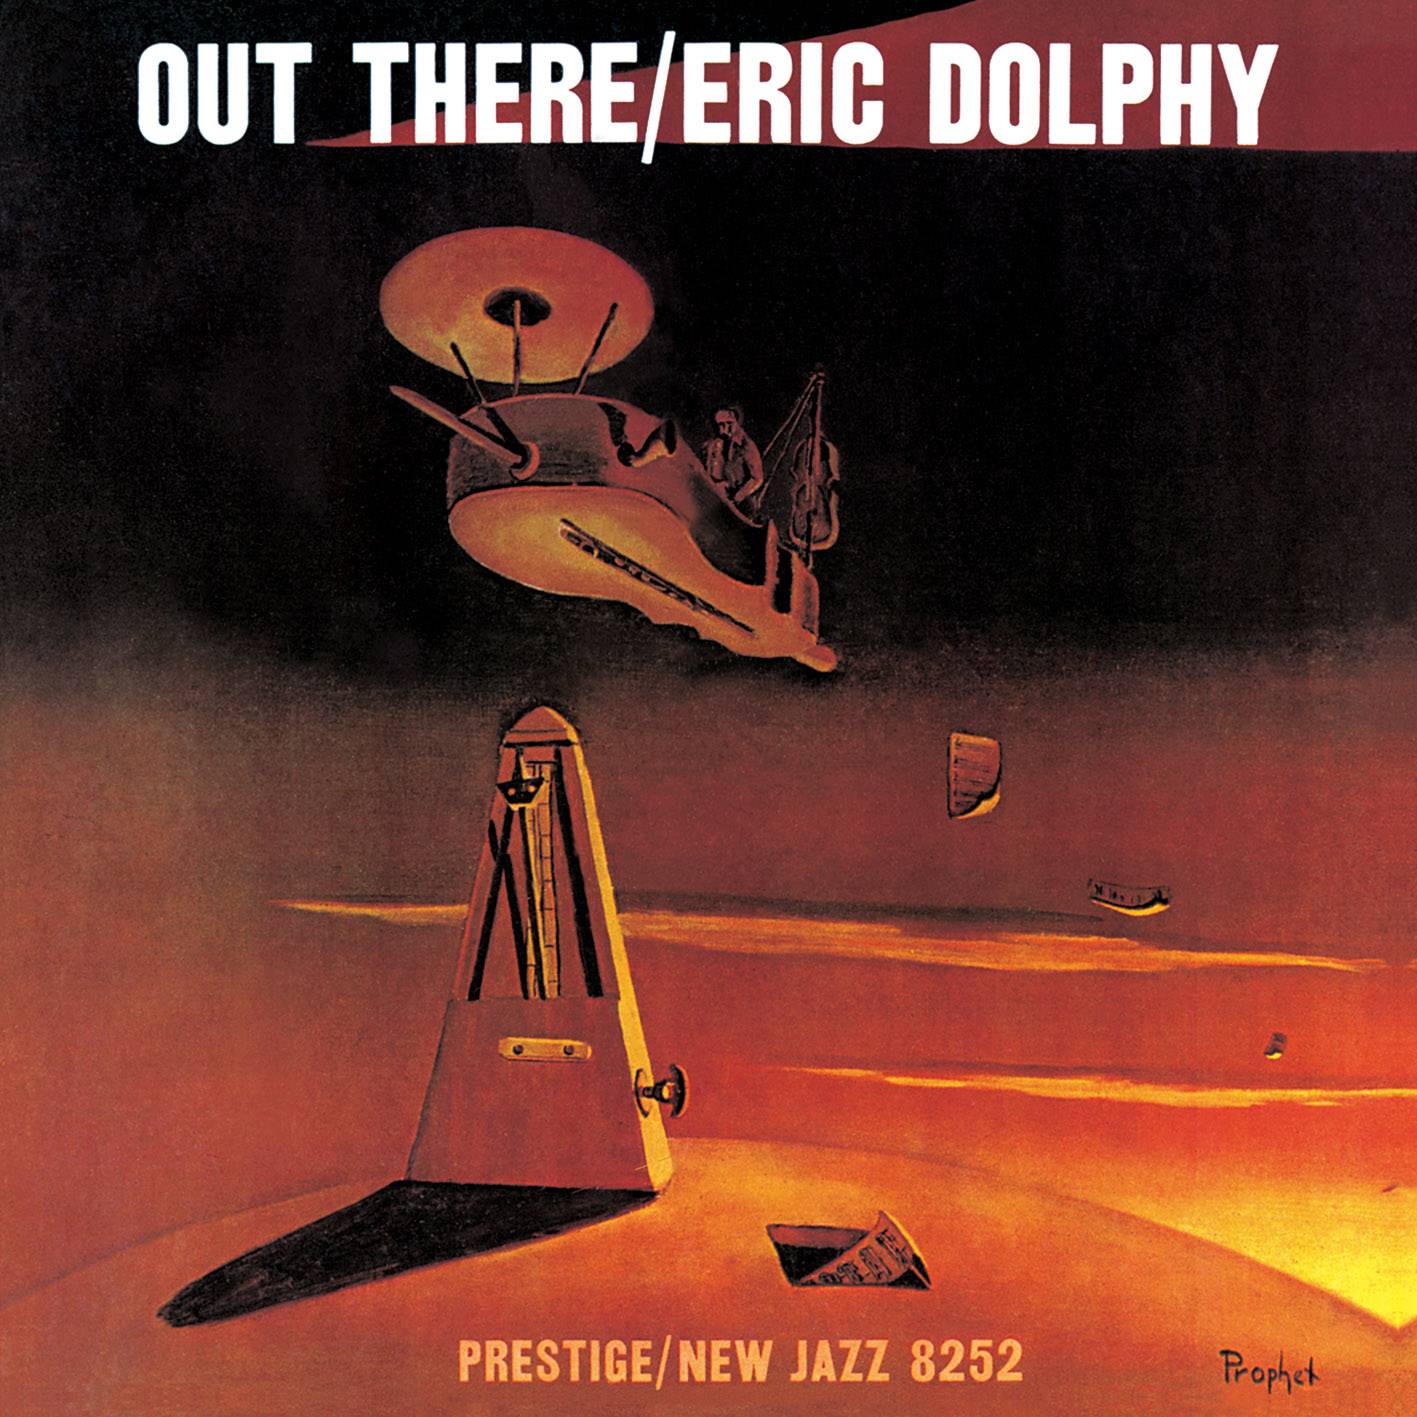 Eric Dolphy – Out There (1960) [Analogue Productions 2018] SACD ISO + DSF DSD64 + FLAC 24bit/96kHz